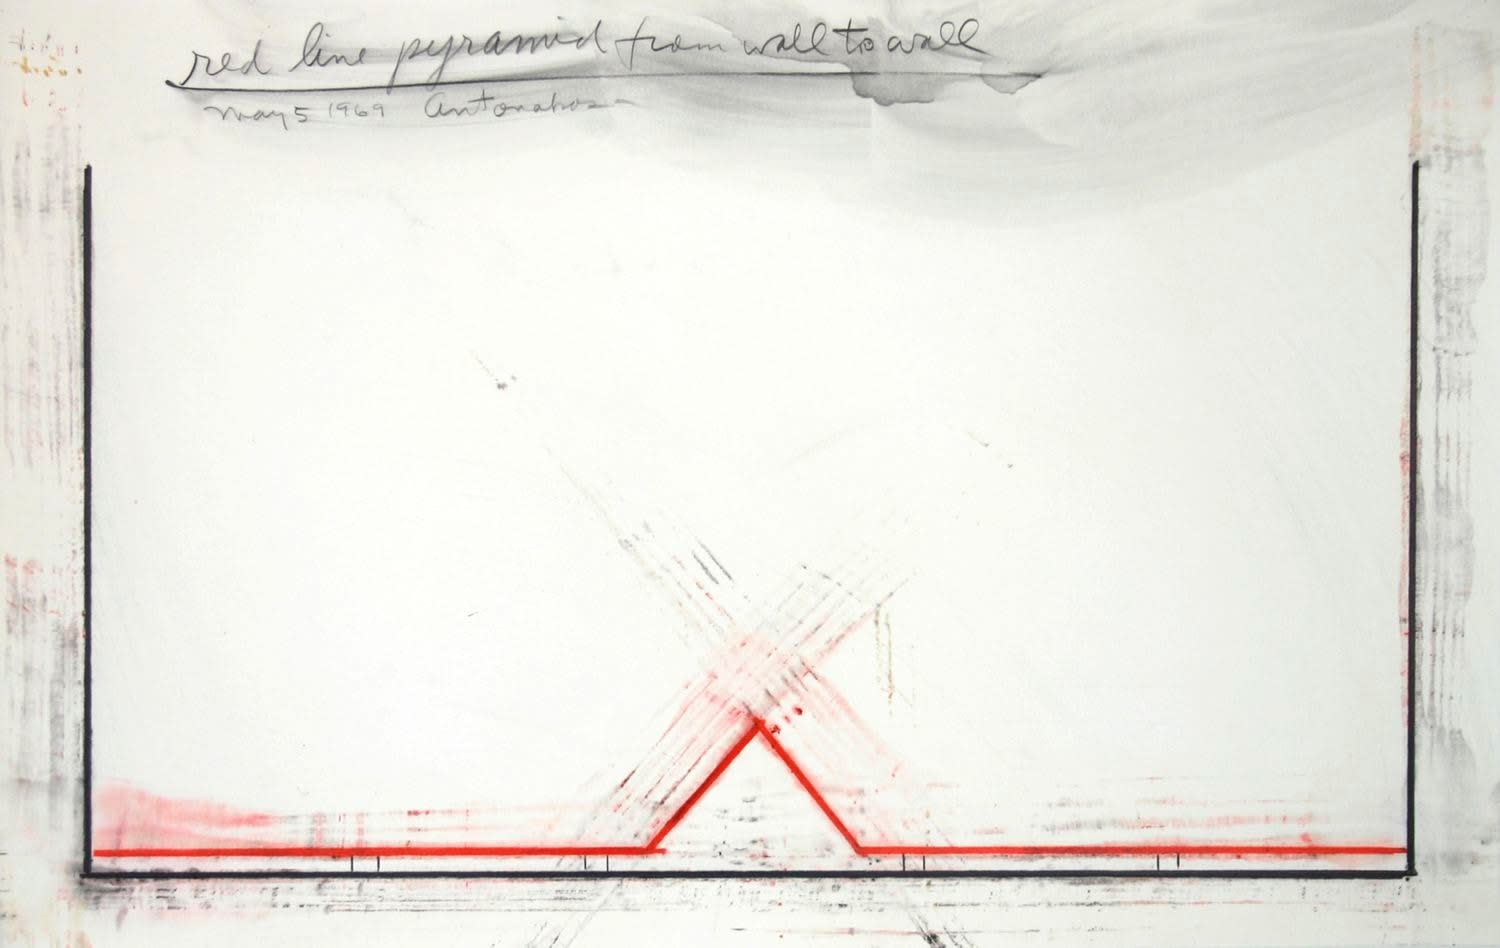 Stephen Antonakos, Red Line Pyramid from Wall to Wall, May 5, 1969, 1969